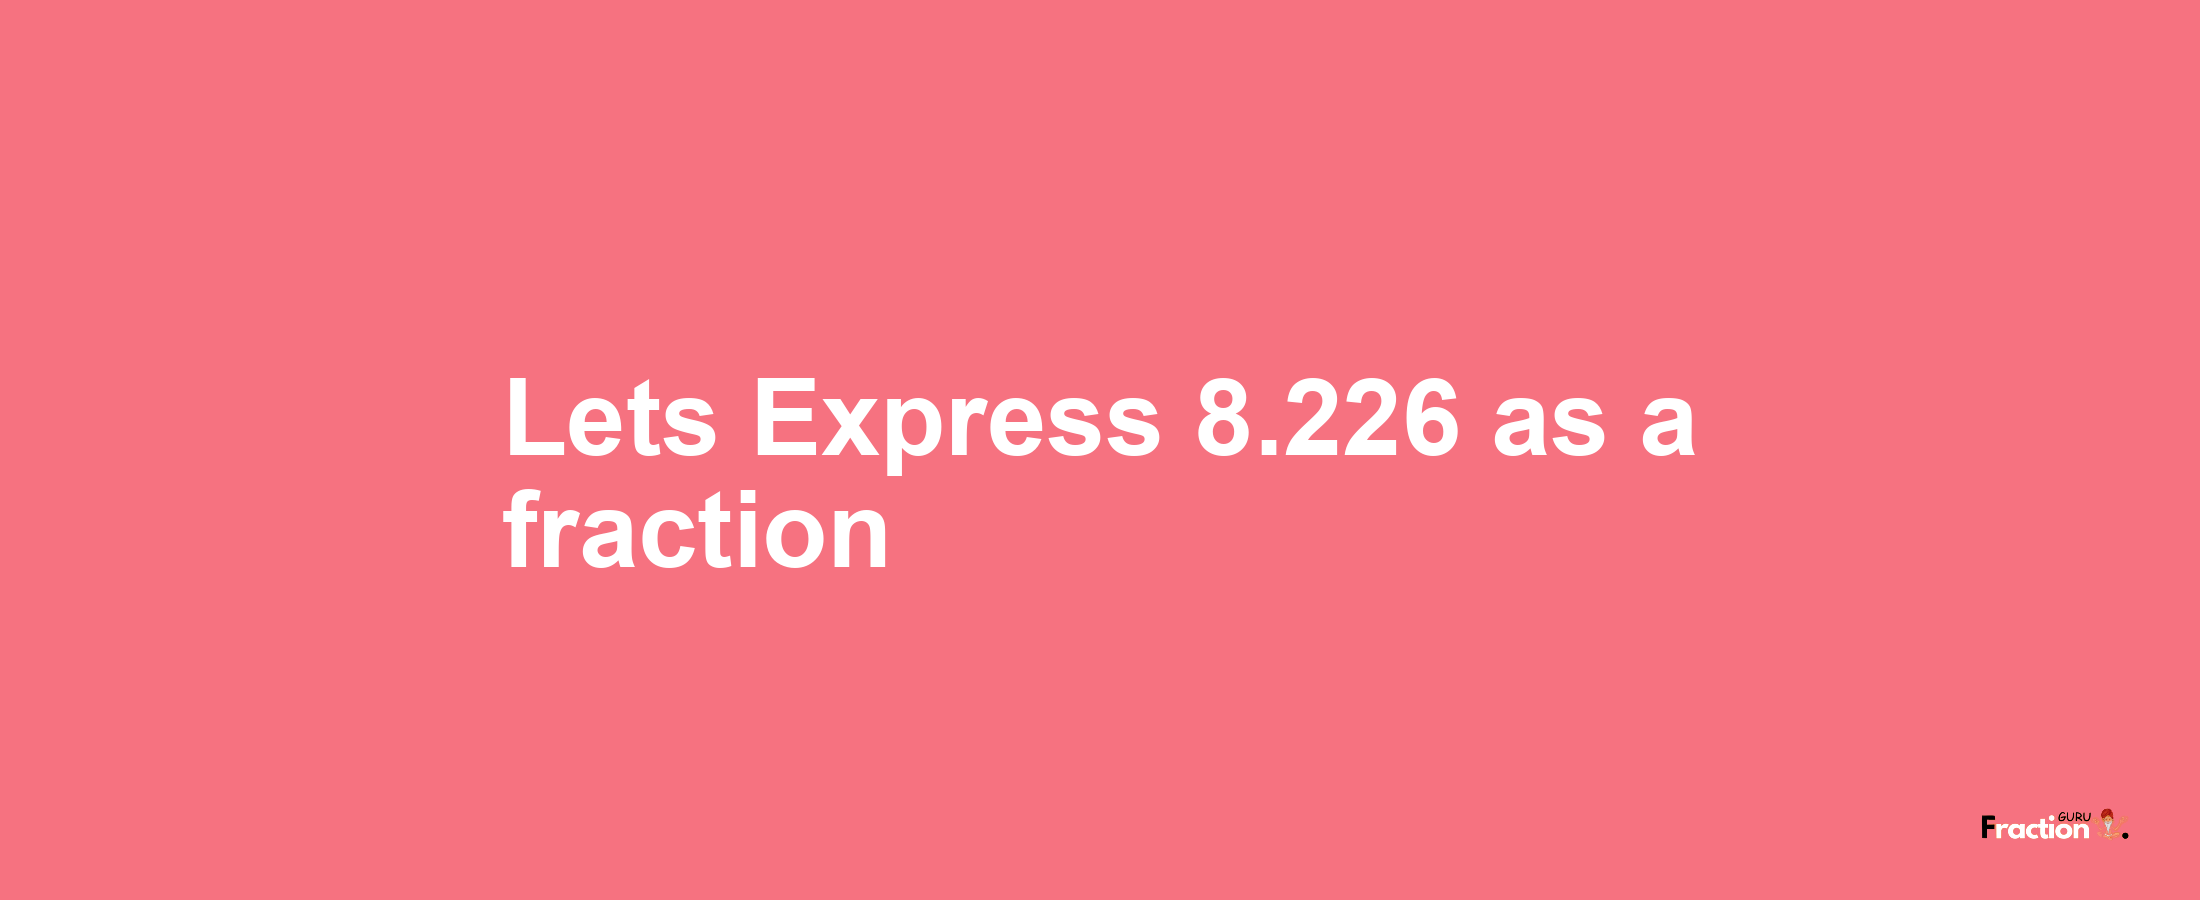 Lets Express 8.226 as afraction